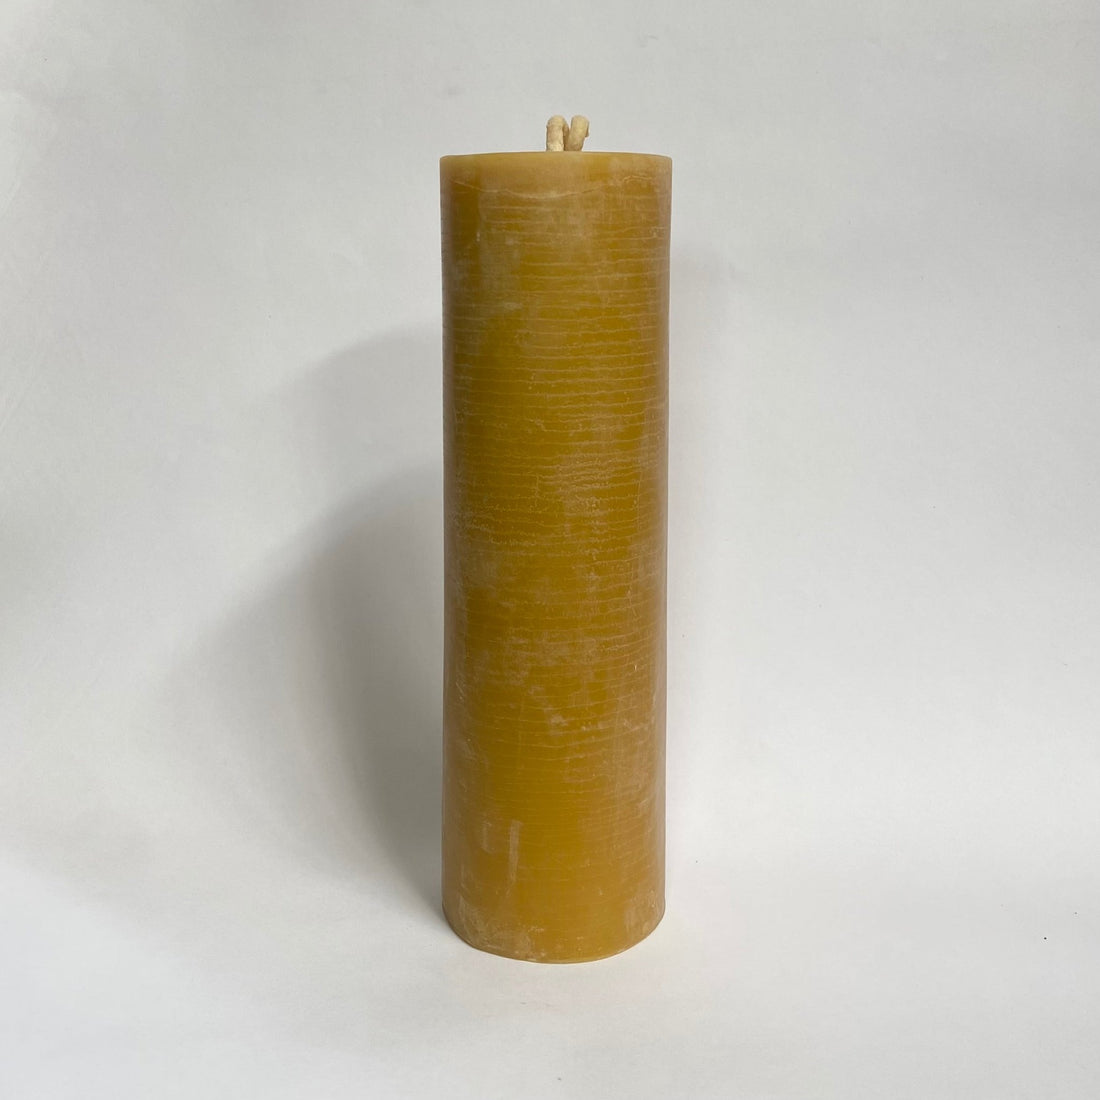 Hohepa Beeswax Candle - X Large Cafe - The Flower Crate